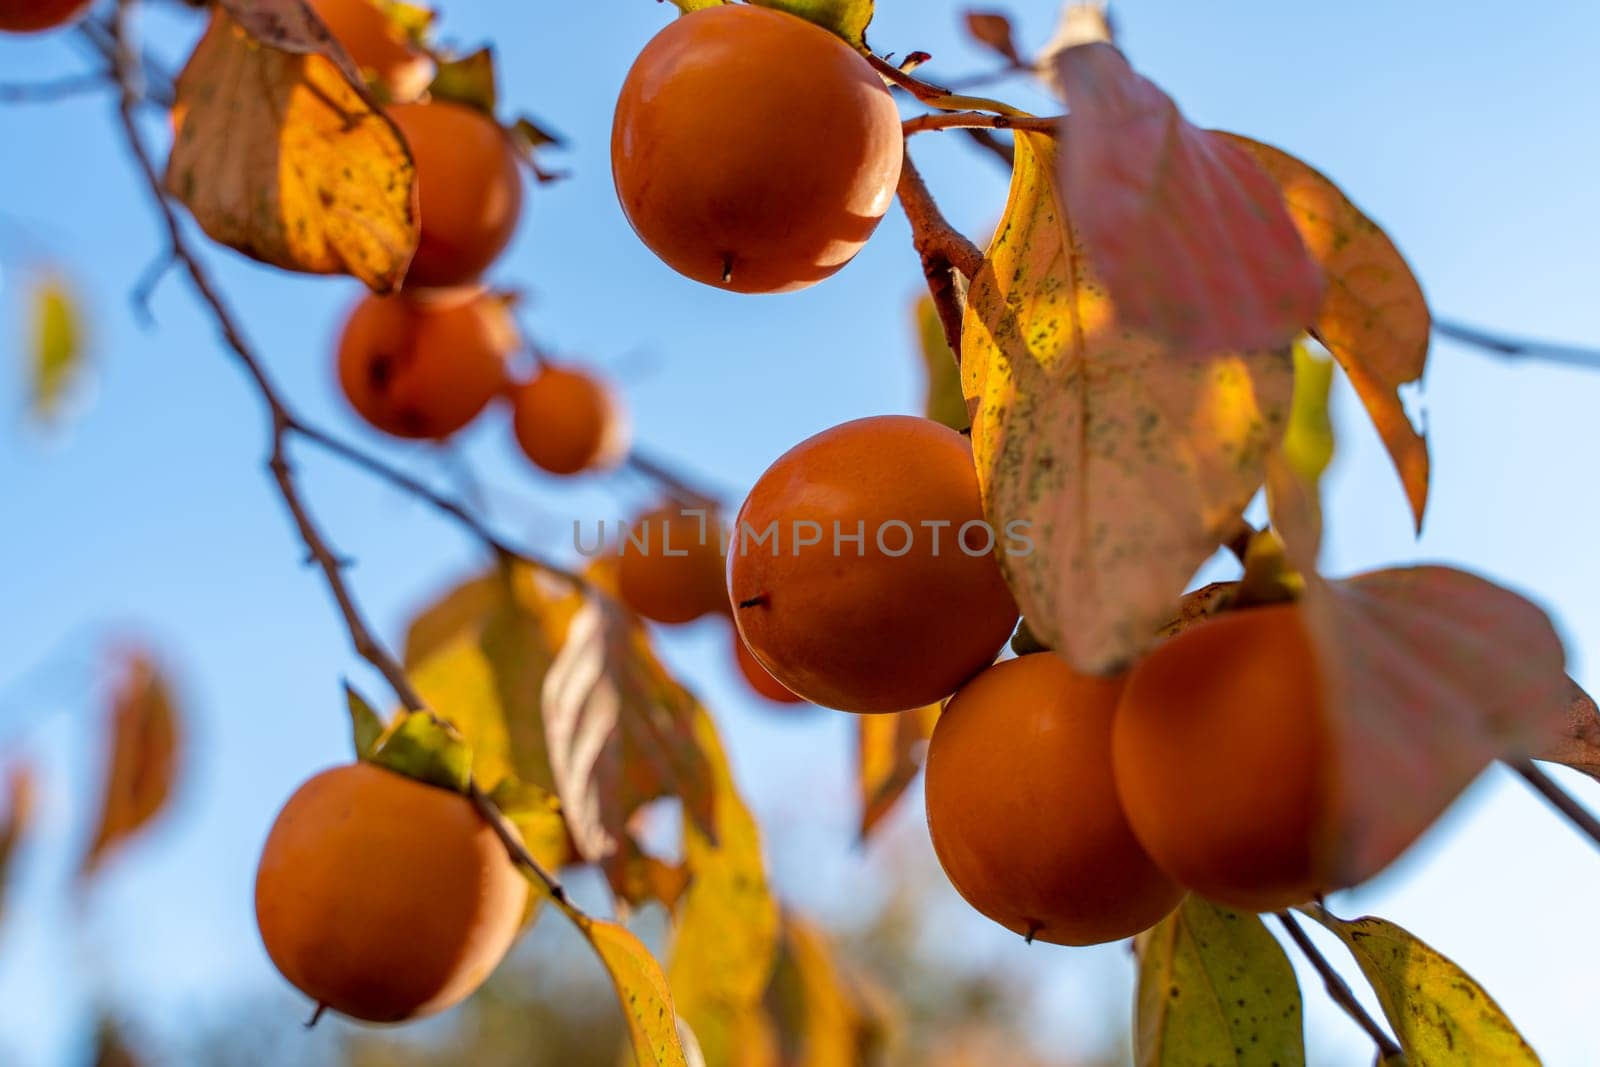 Persimmon ripe fruit garden. Tree branches with ripe persimmon fruits on a sunny day.